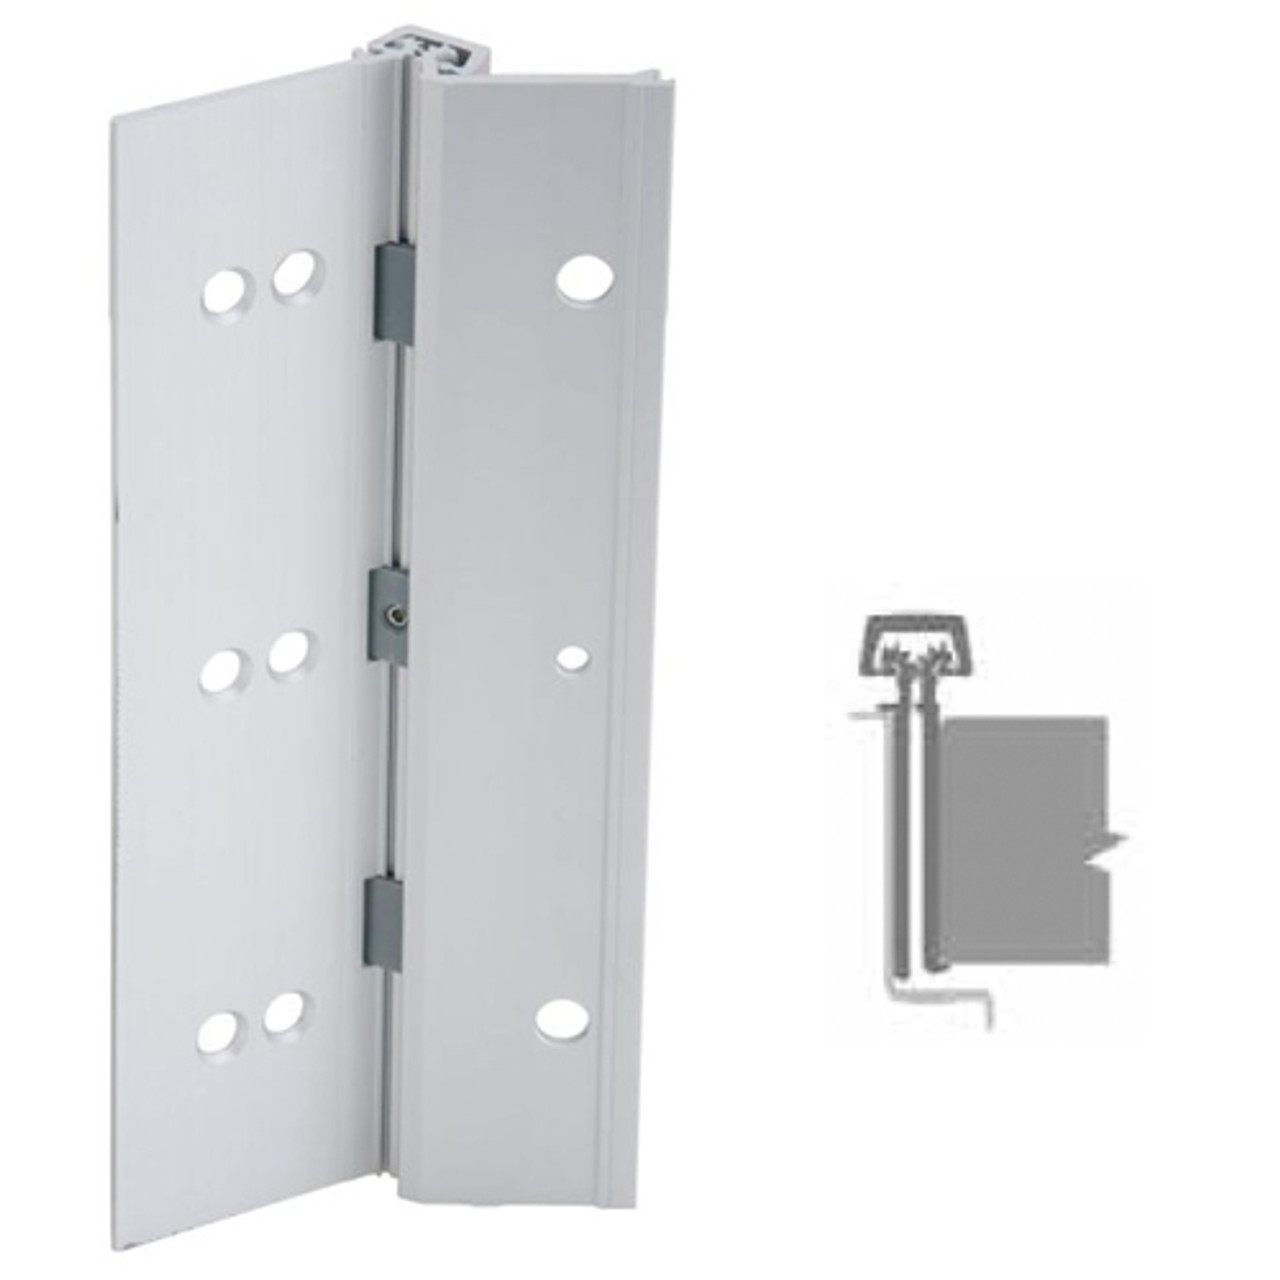 224HD-US28-85-SECWDHM IVES Full Mortise Continuous Geared Hinges with Security Screws - Hex Pin Drive in Satin Aluminum